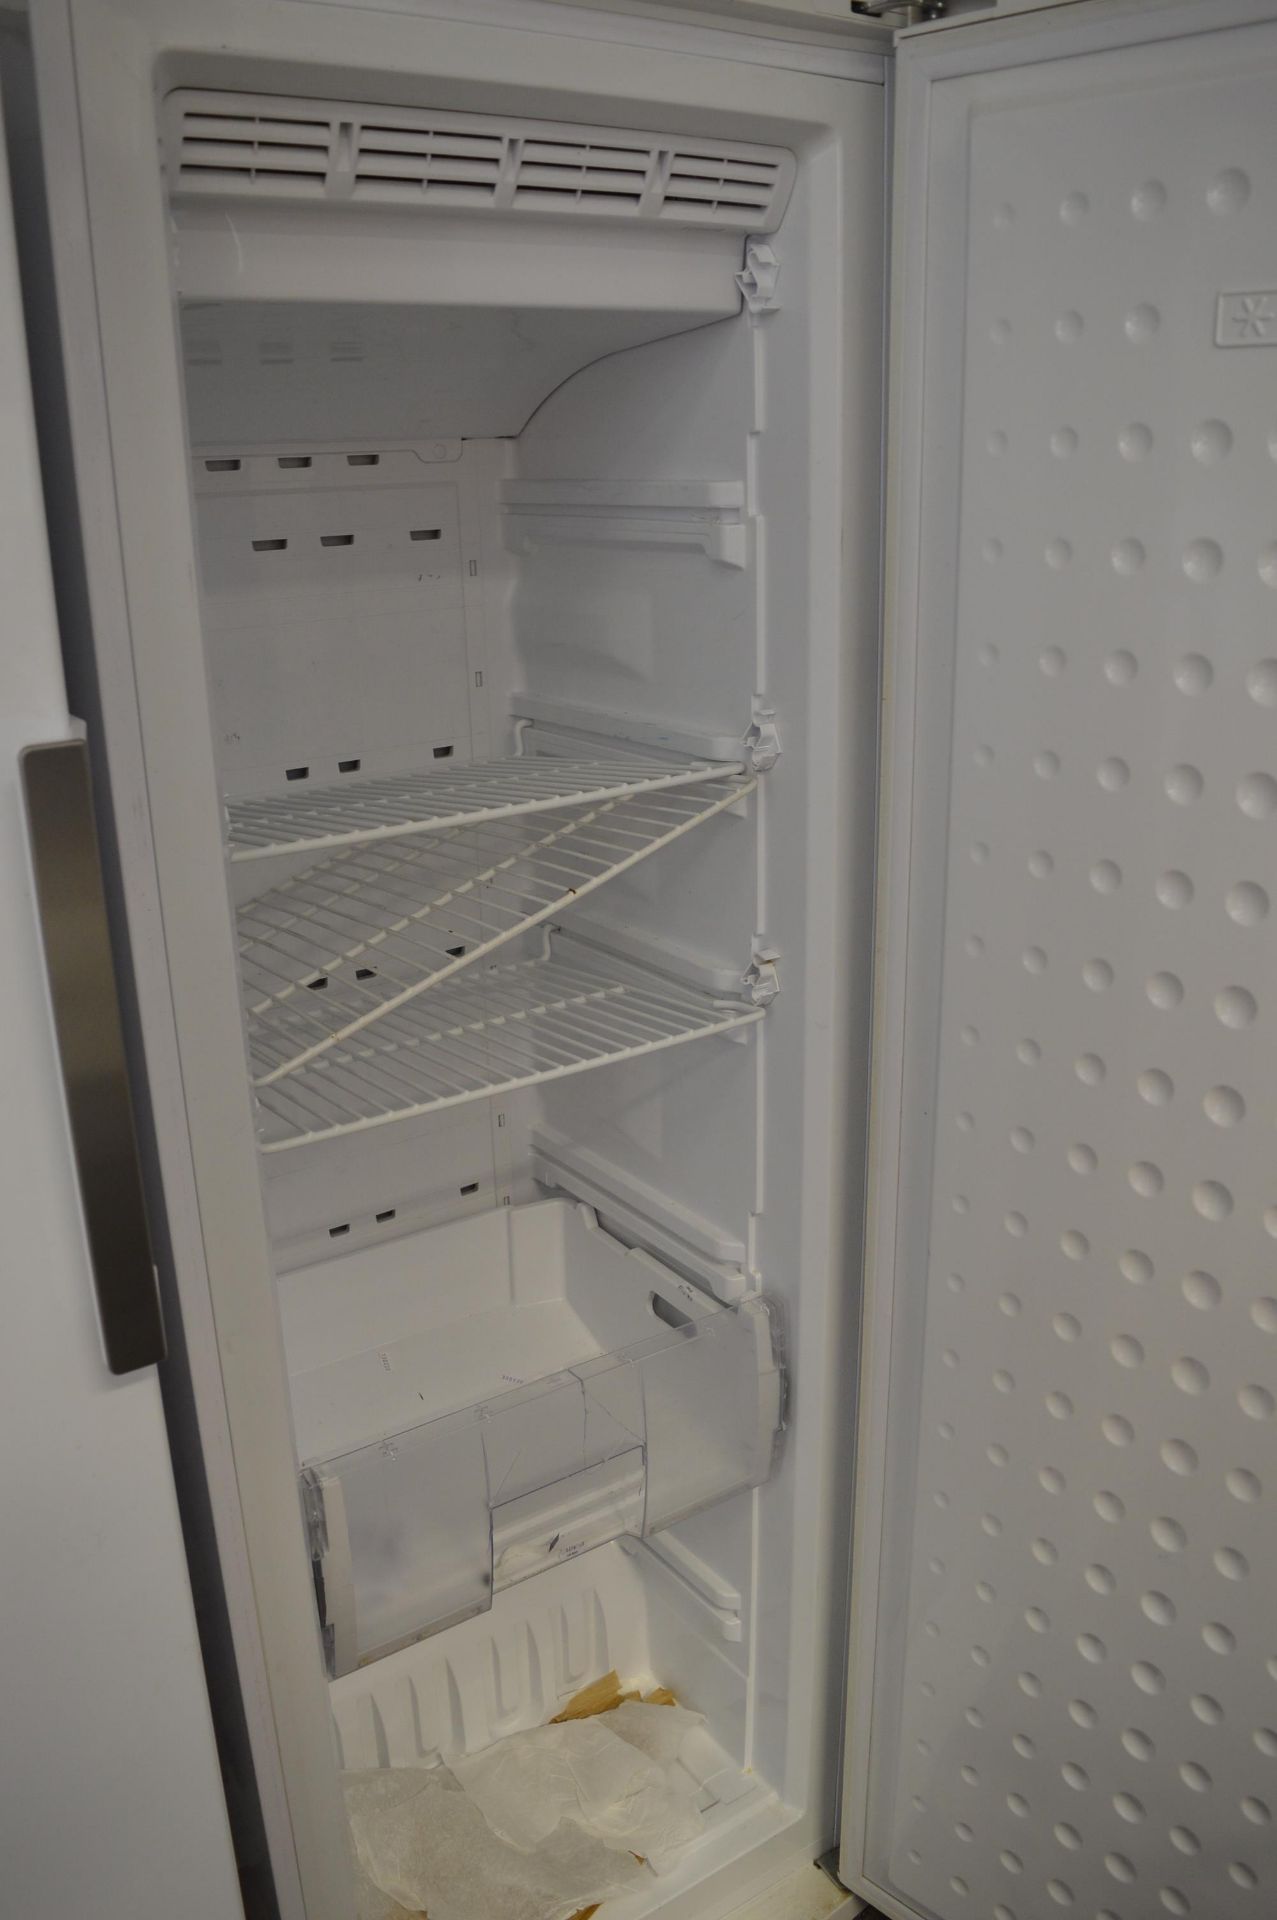 Beko Class A Frost Free Upright Freezer - Image 2 of 2